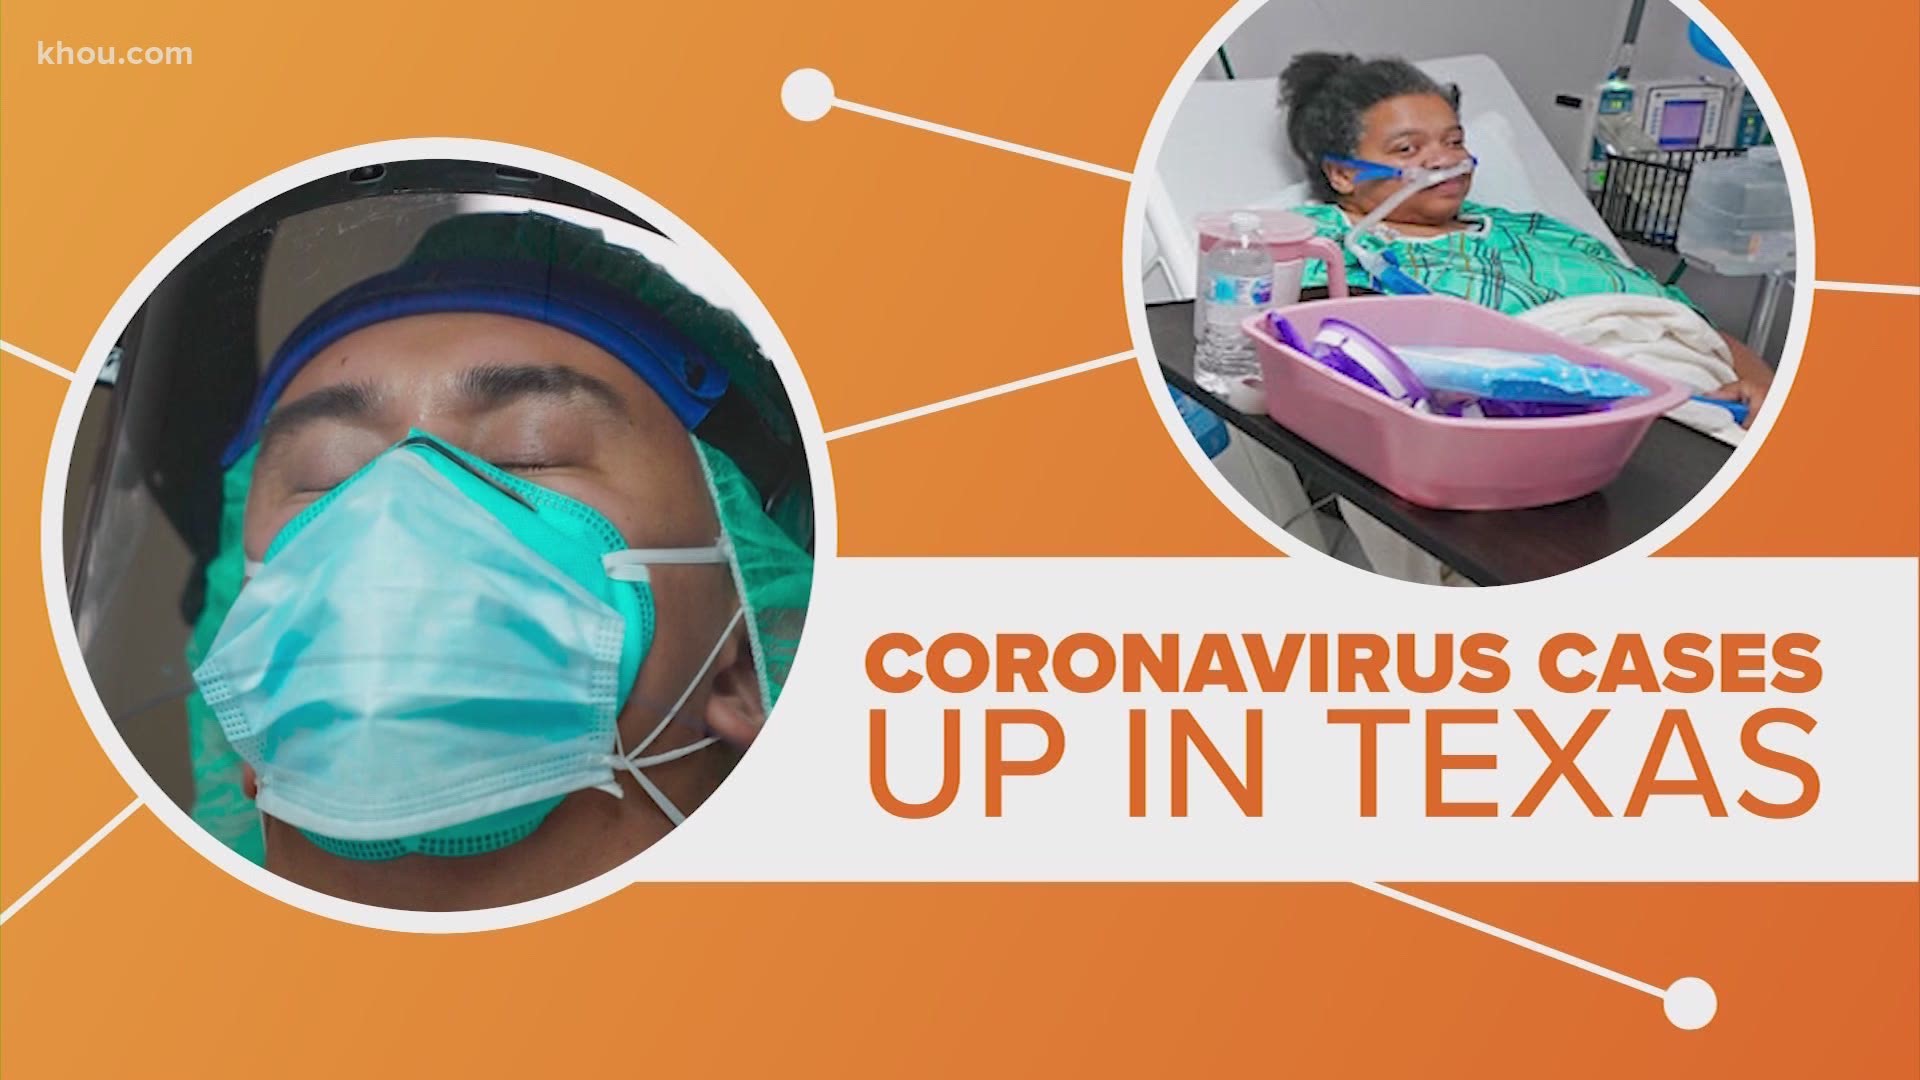 Coronavirus cases are on the way back up in Texas which is not a great sign headed into winter. But experts say this second surge may not be as bad as the first.